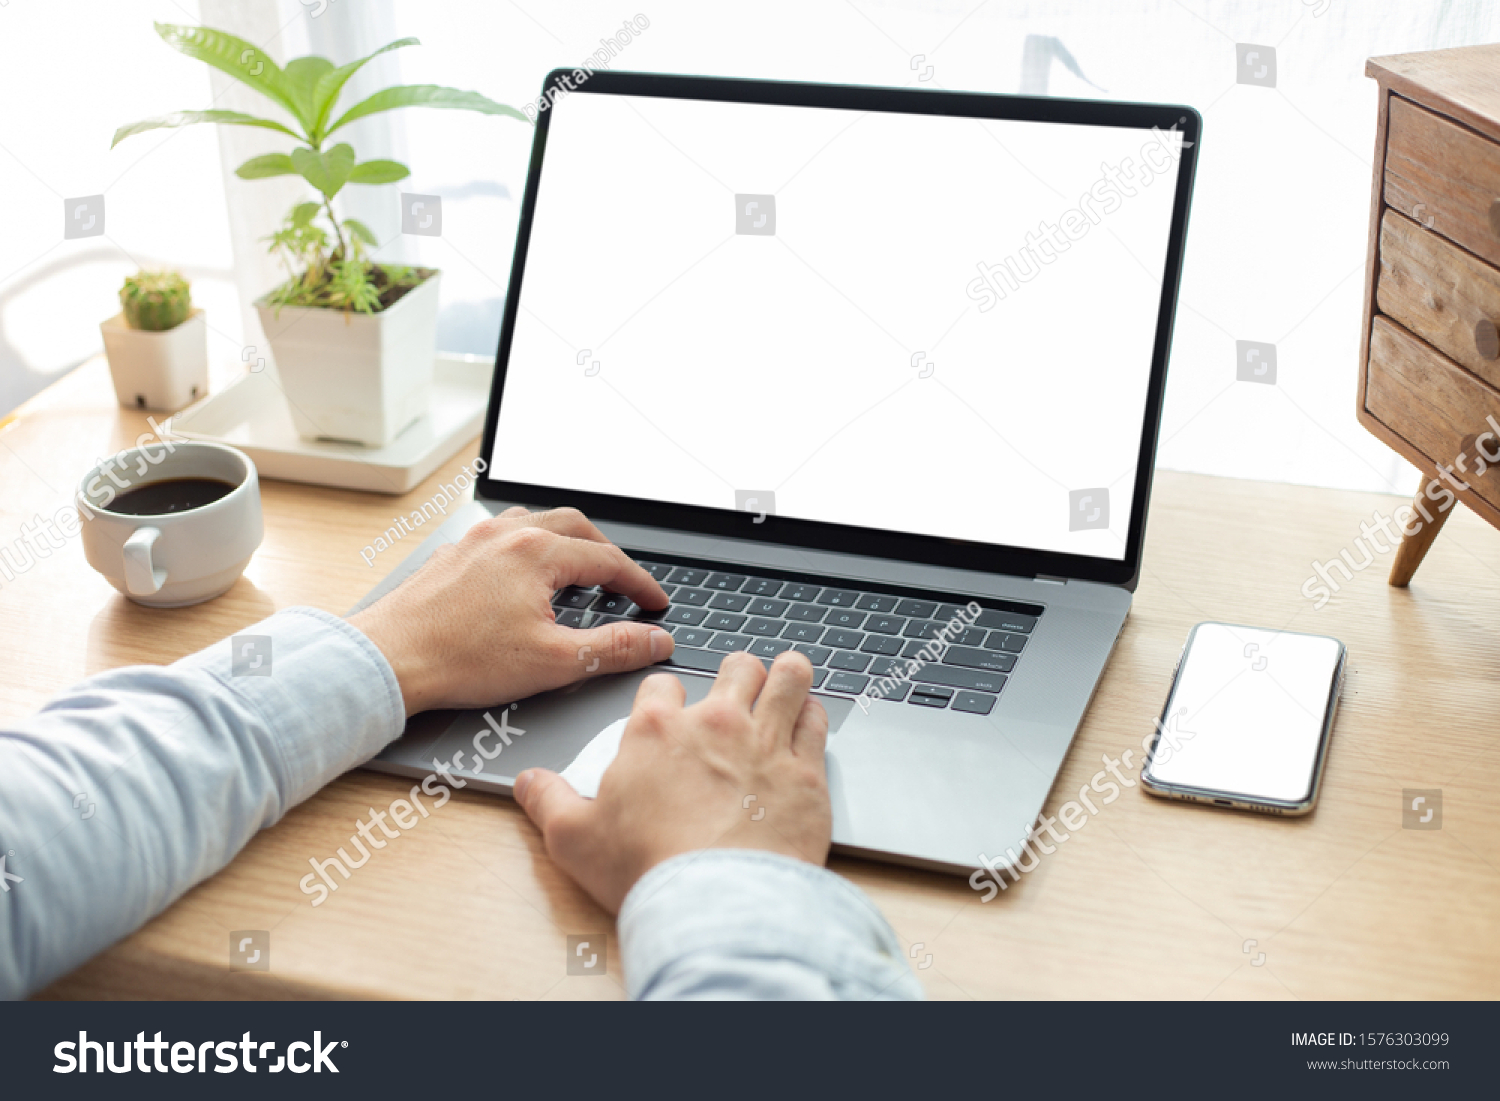 mockup image blank screen computer,cell phone with white background for advertising text,hand man using laptop texting mobile contact business search information on desk in office.marketing and design #1576303099